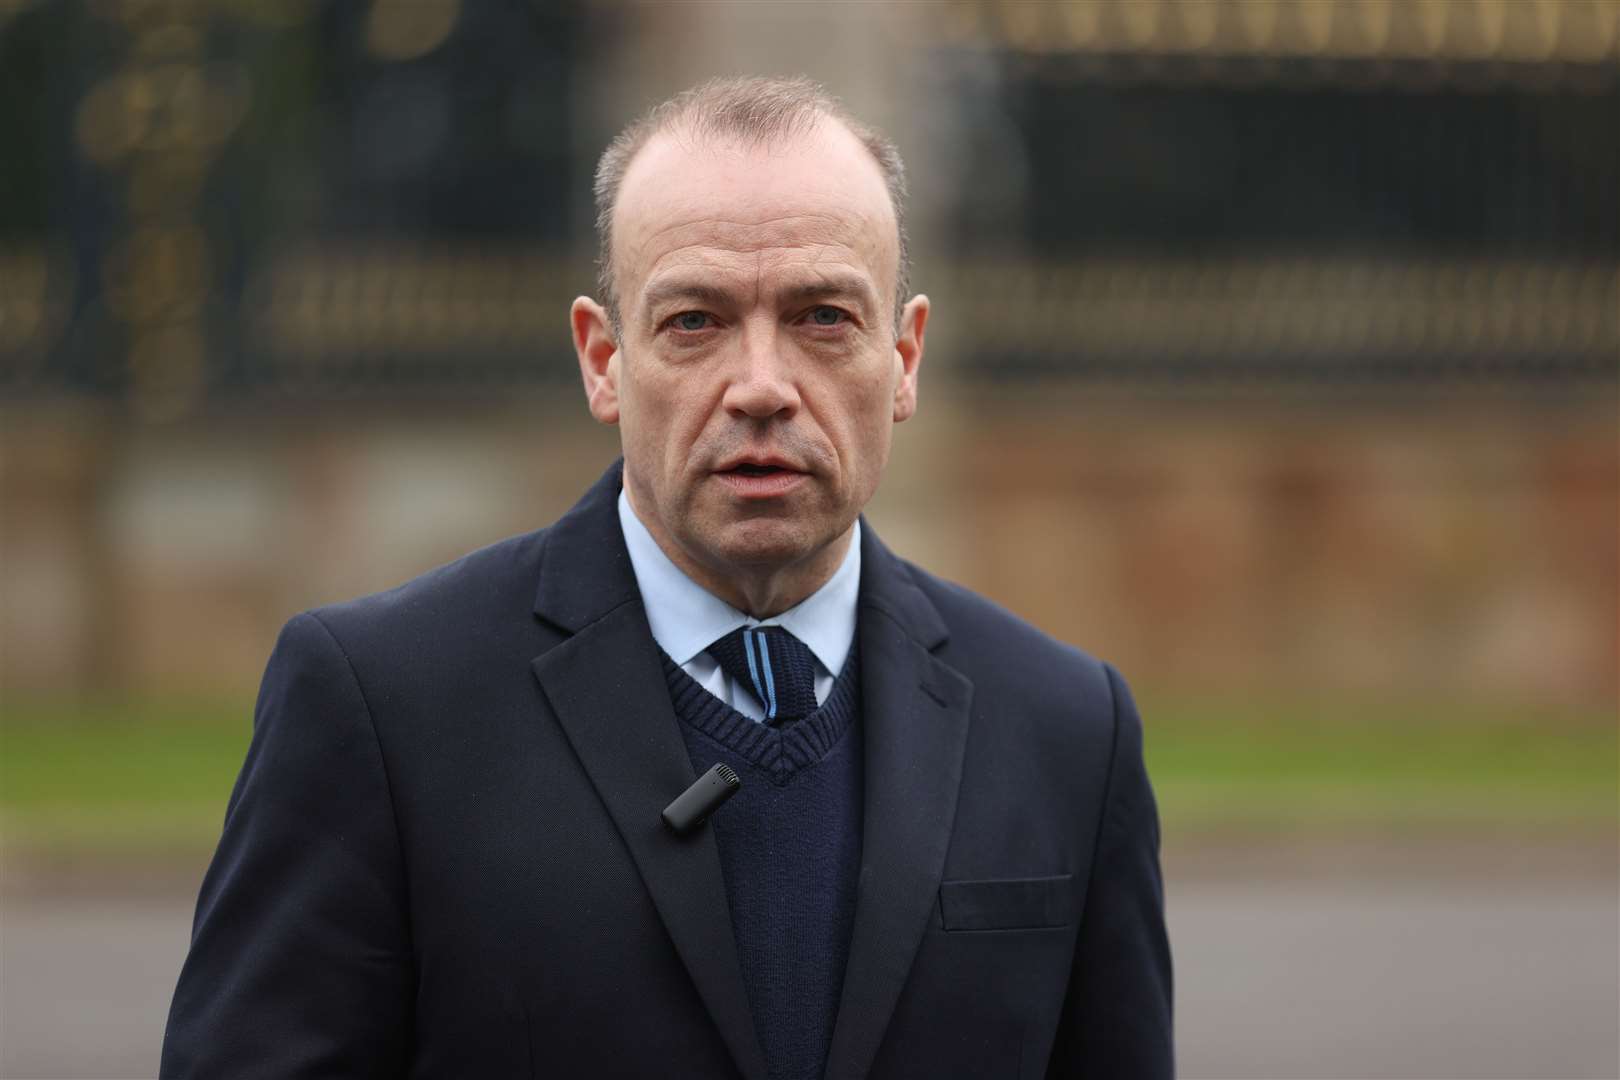 Northern Ireland Secretary Chris Heaton-Harris has announced an independent statutory inquiry into the Omagh bombing (Liam McBurney/PA)